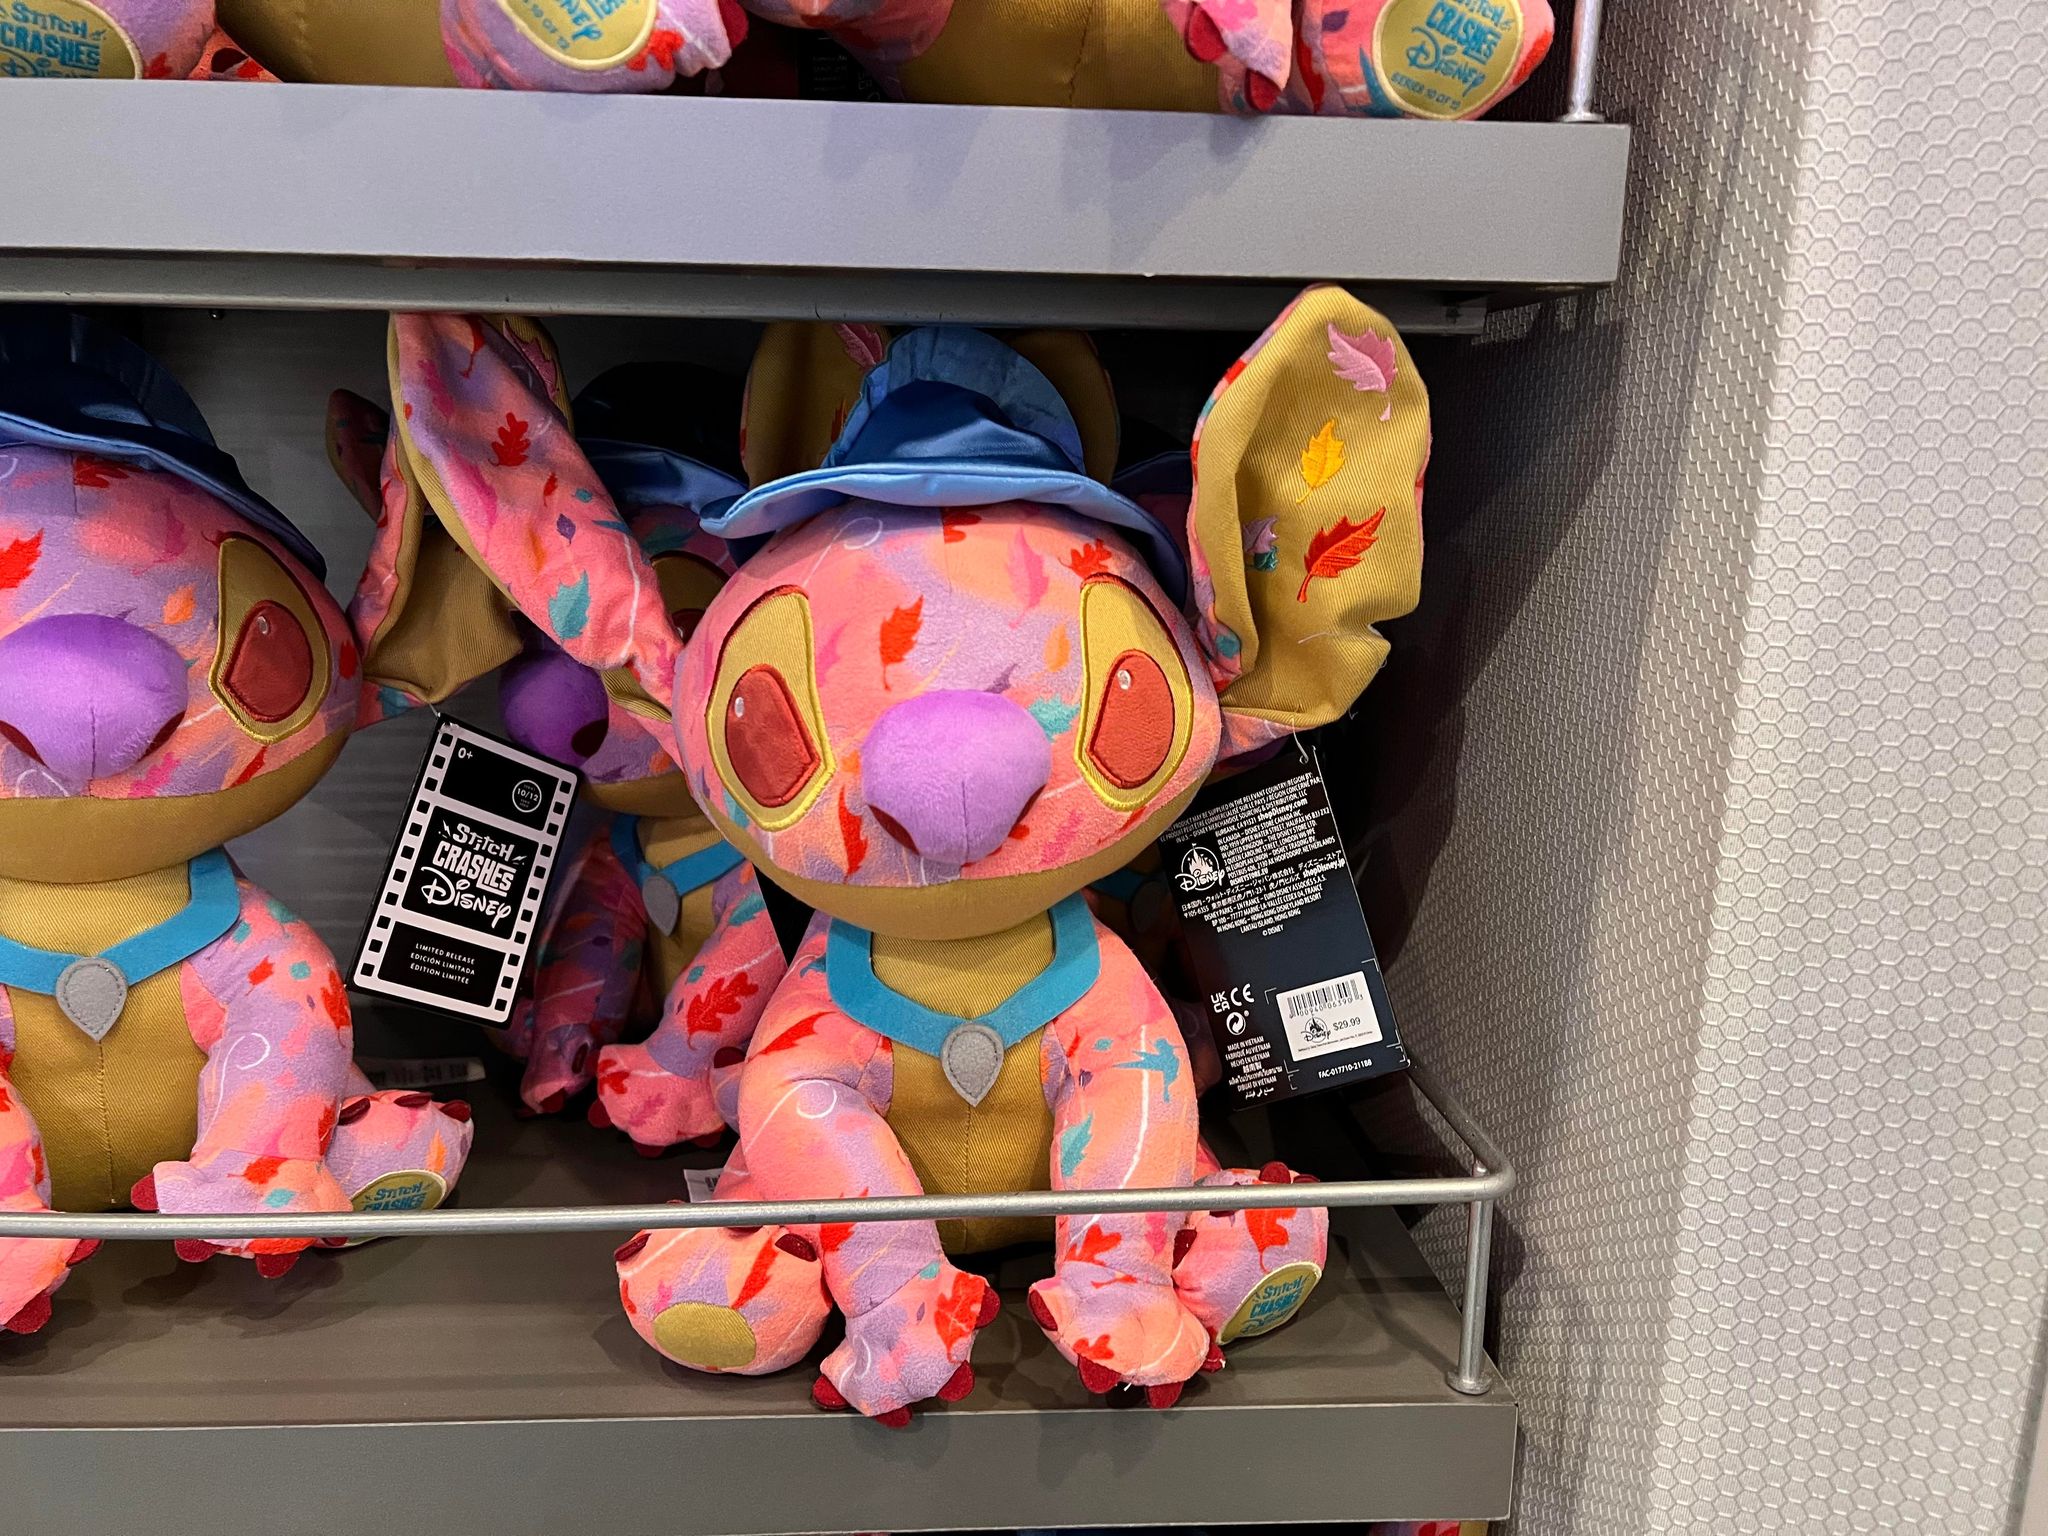 This Is Not A Test. Experiment 626 Has Been Spotted At Star Traders. Stitch is on the loose! Magic Kingdom 2